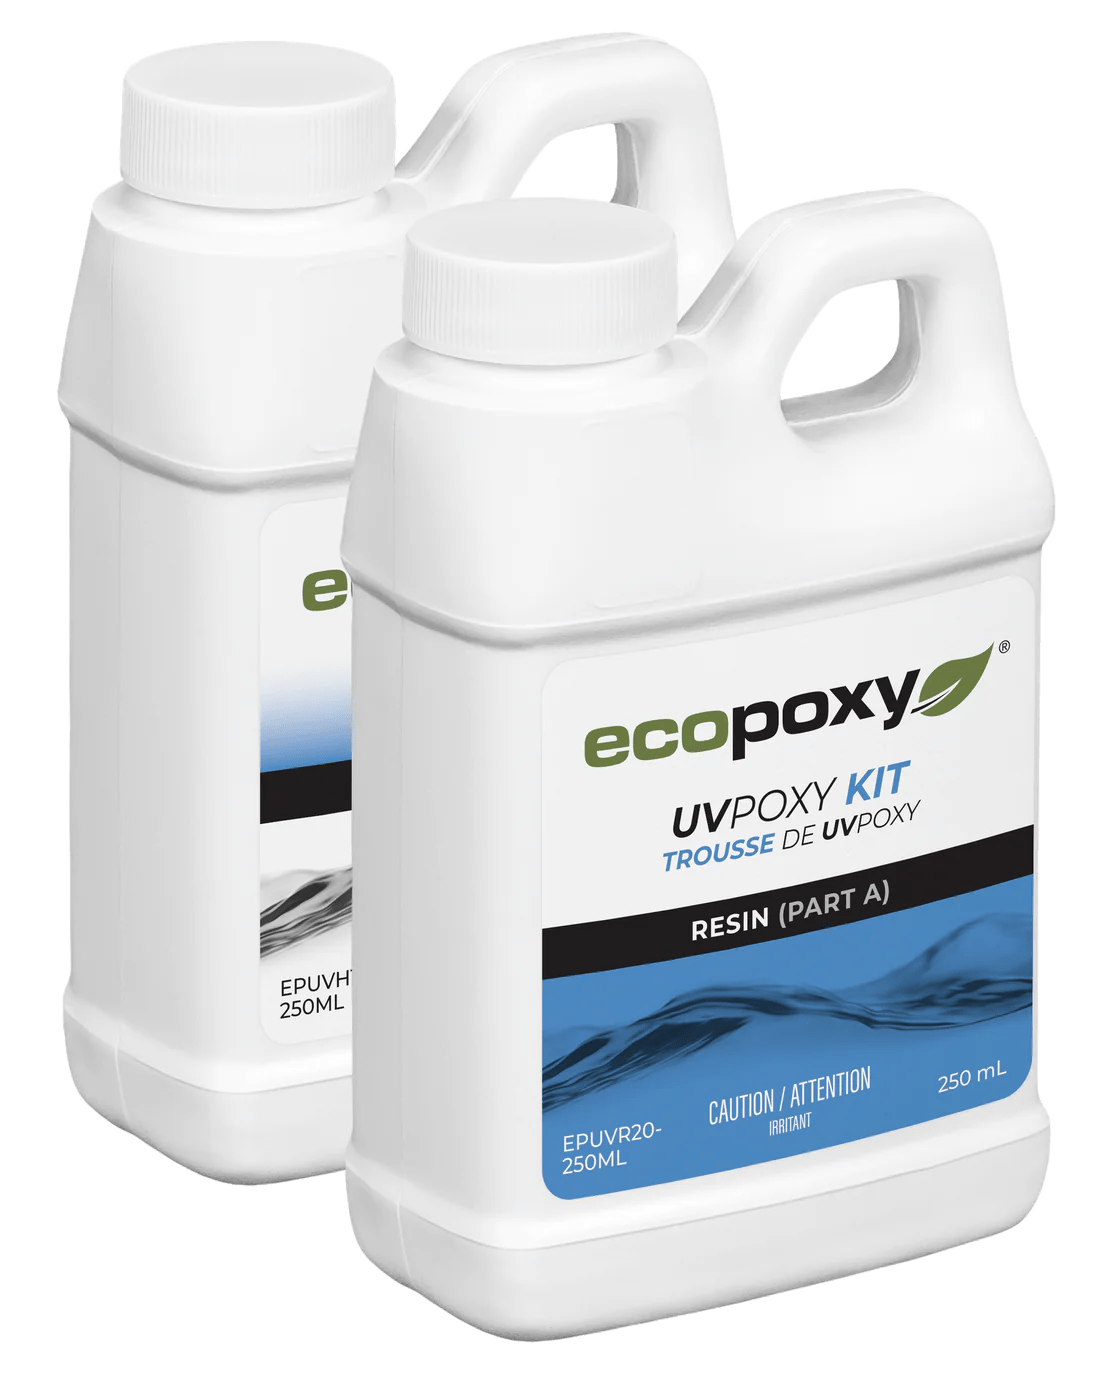 How Ecopoxy Is Different Then Epoxy - All American Woodworks